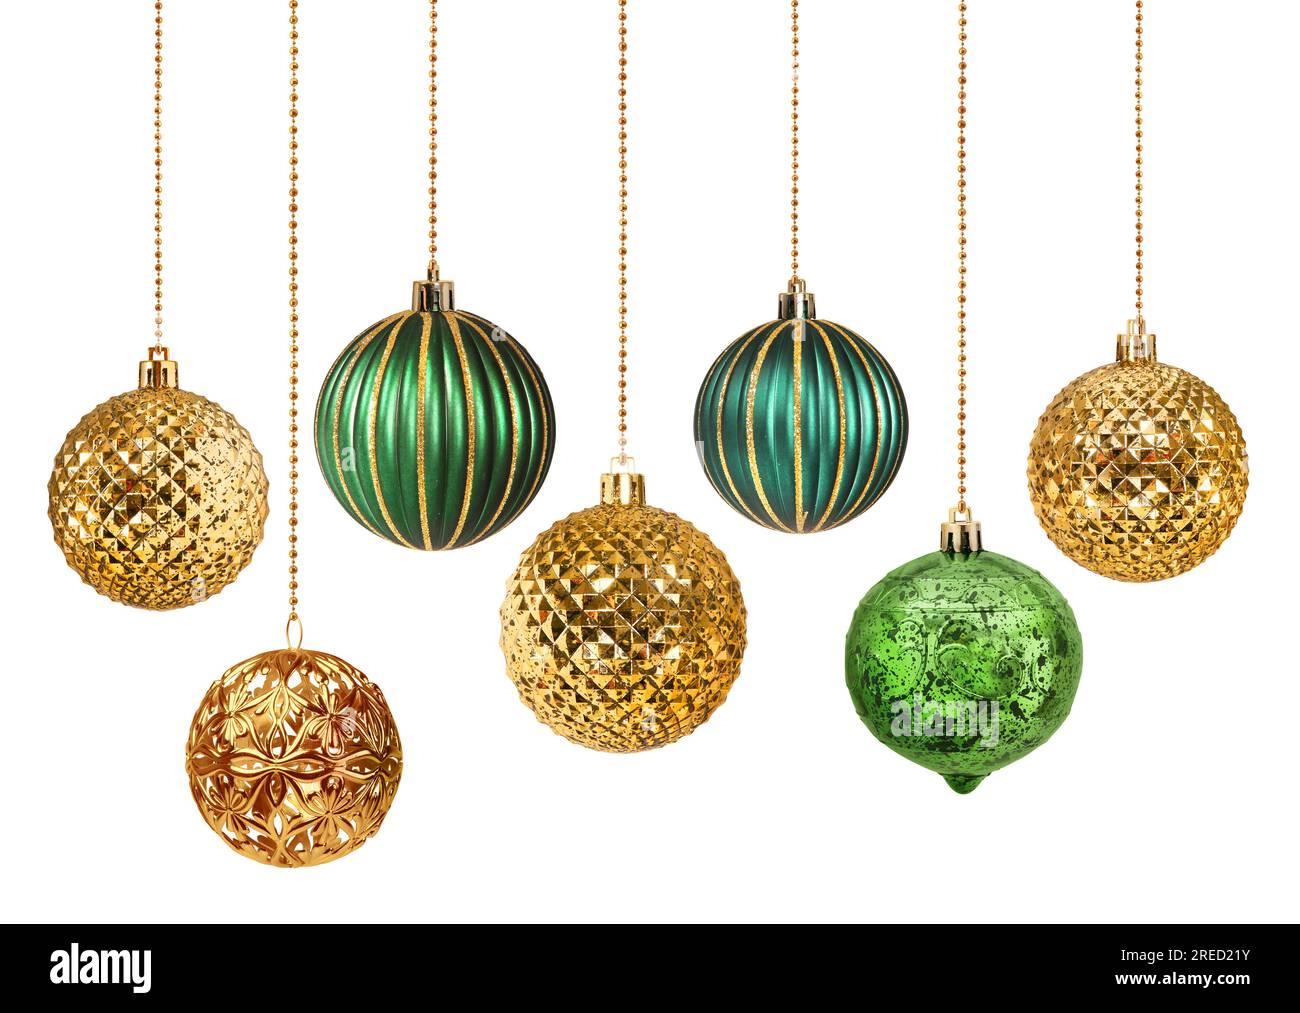 Set of seven golden and green decoration Christmas balls collection hanging isolated Stock Photo